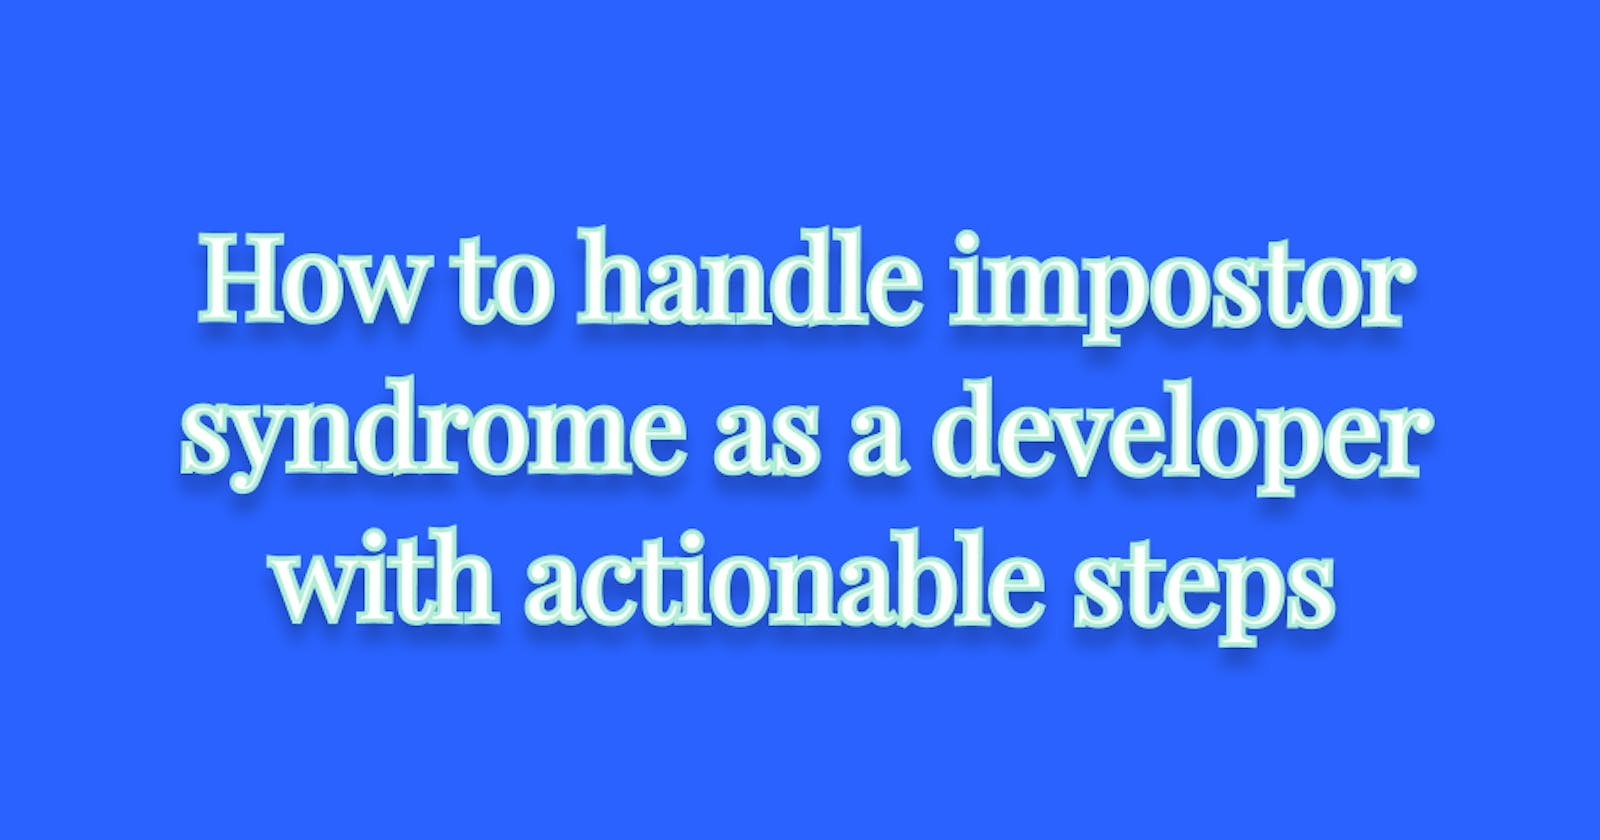 How to handle impostor syndrome as a developer with actionable steps